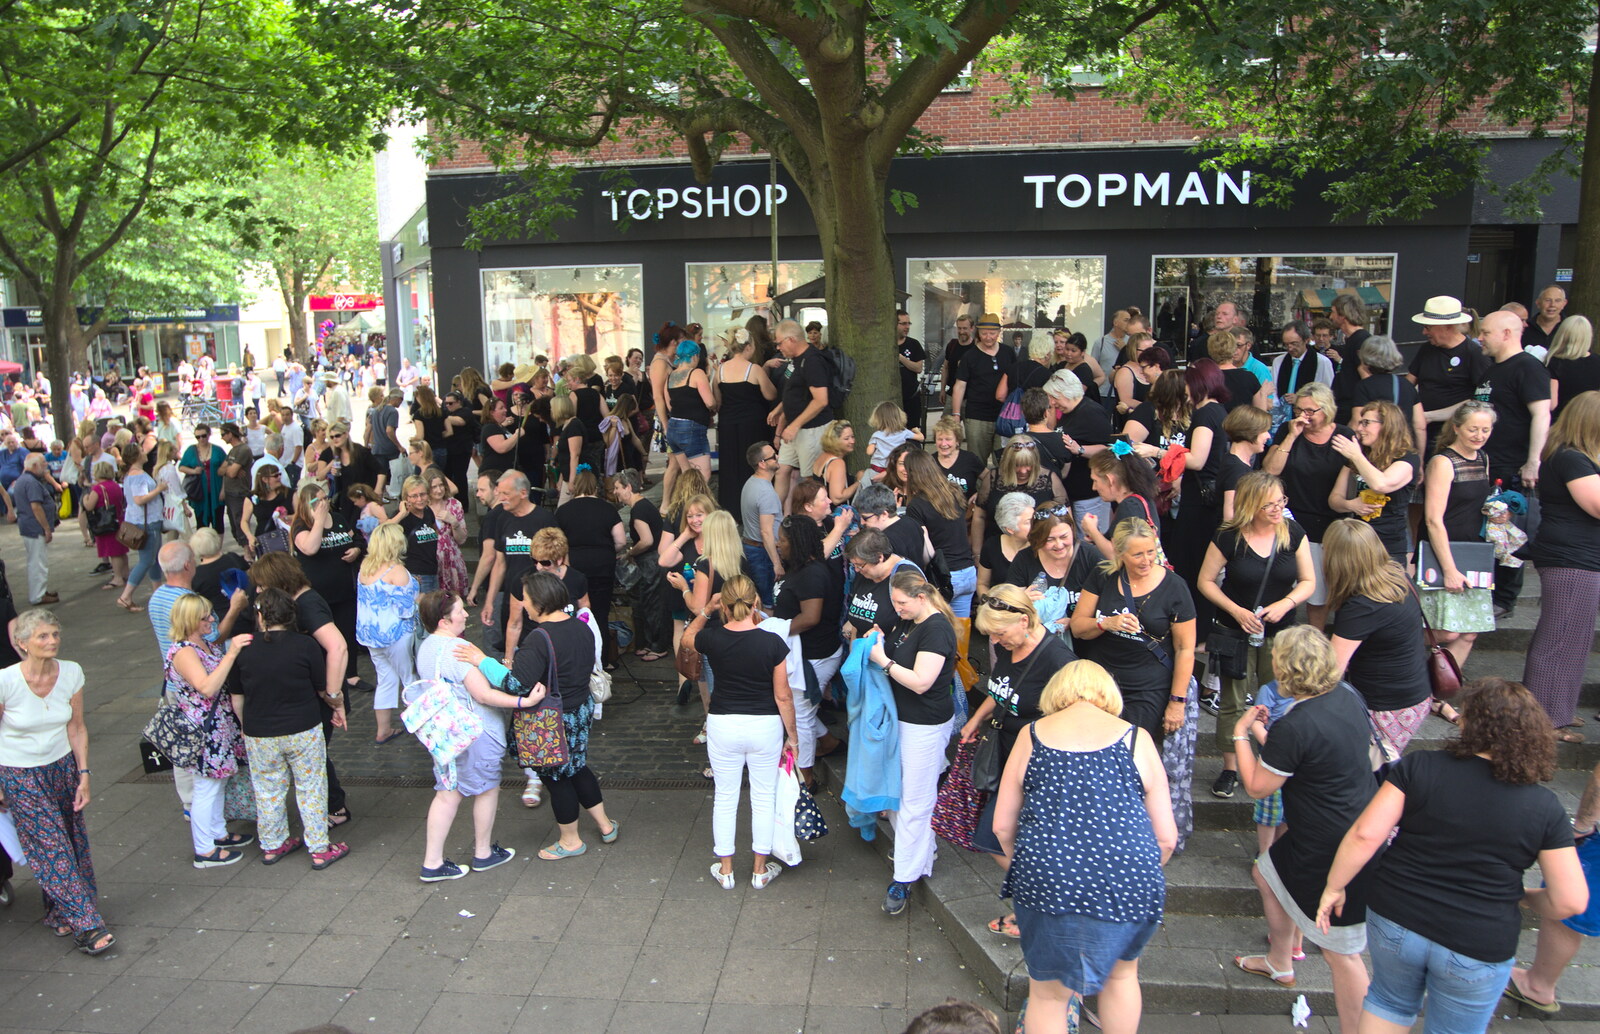 The choice breaks up after its singing from Isobel's Choral Flash Mob, Norwich, Norfolk - 17th June 2017